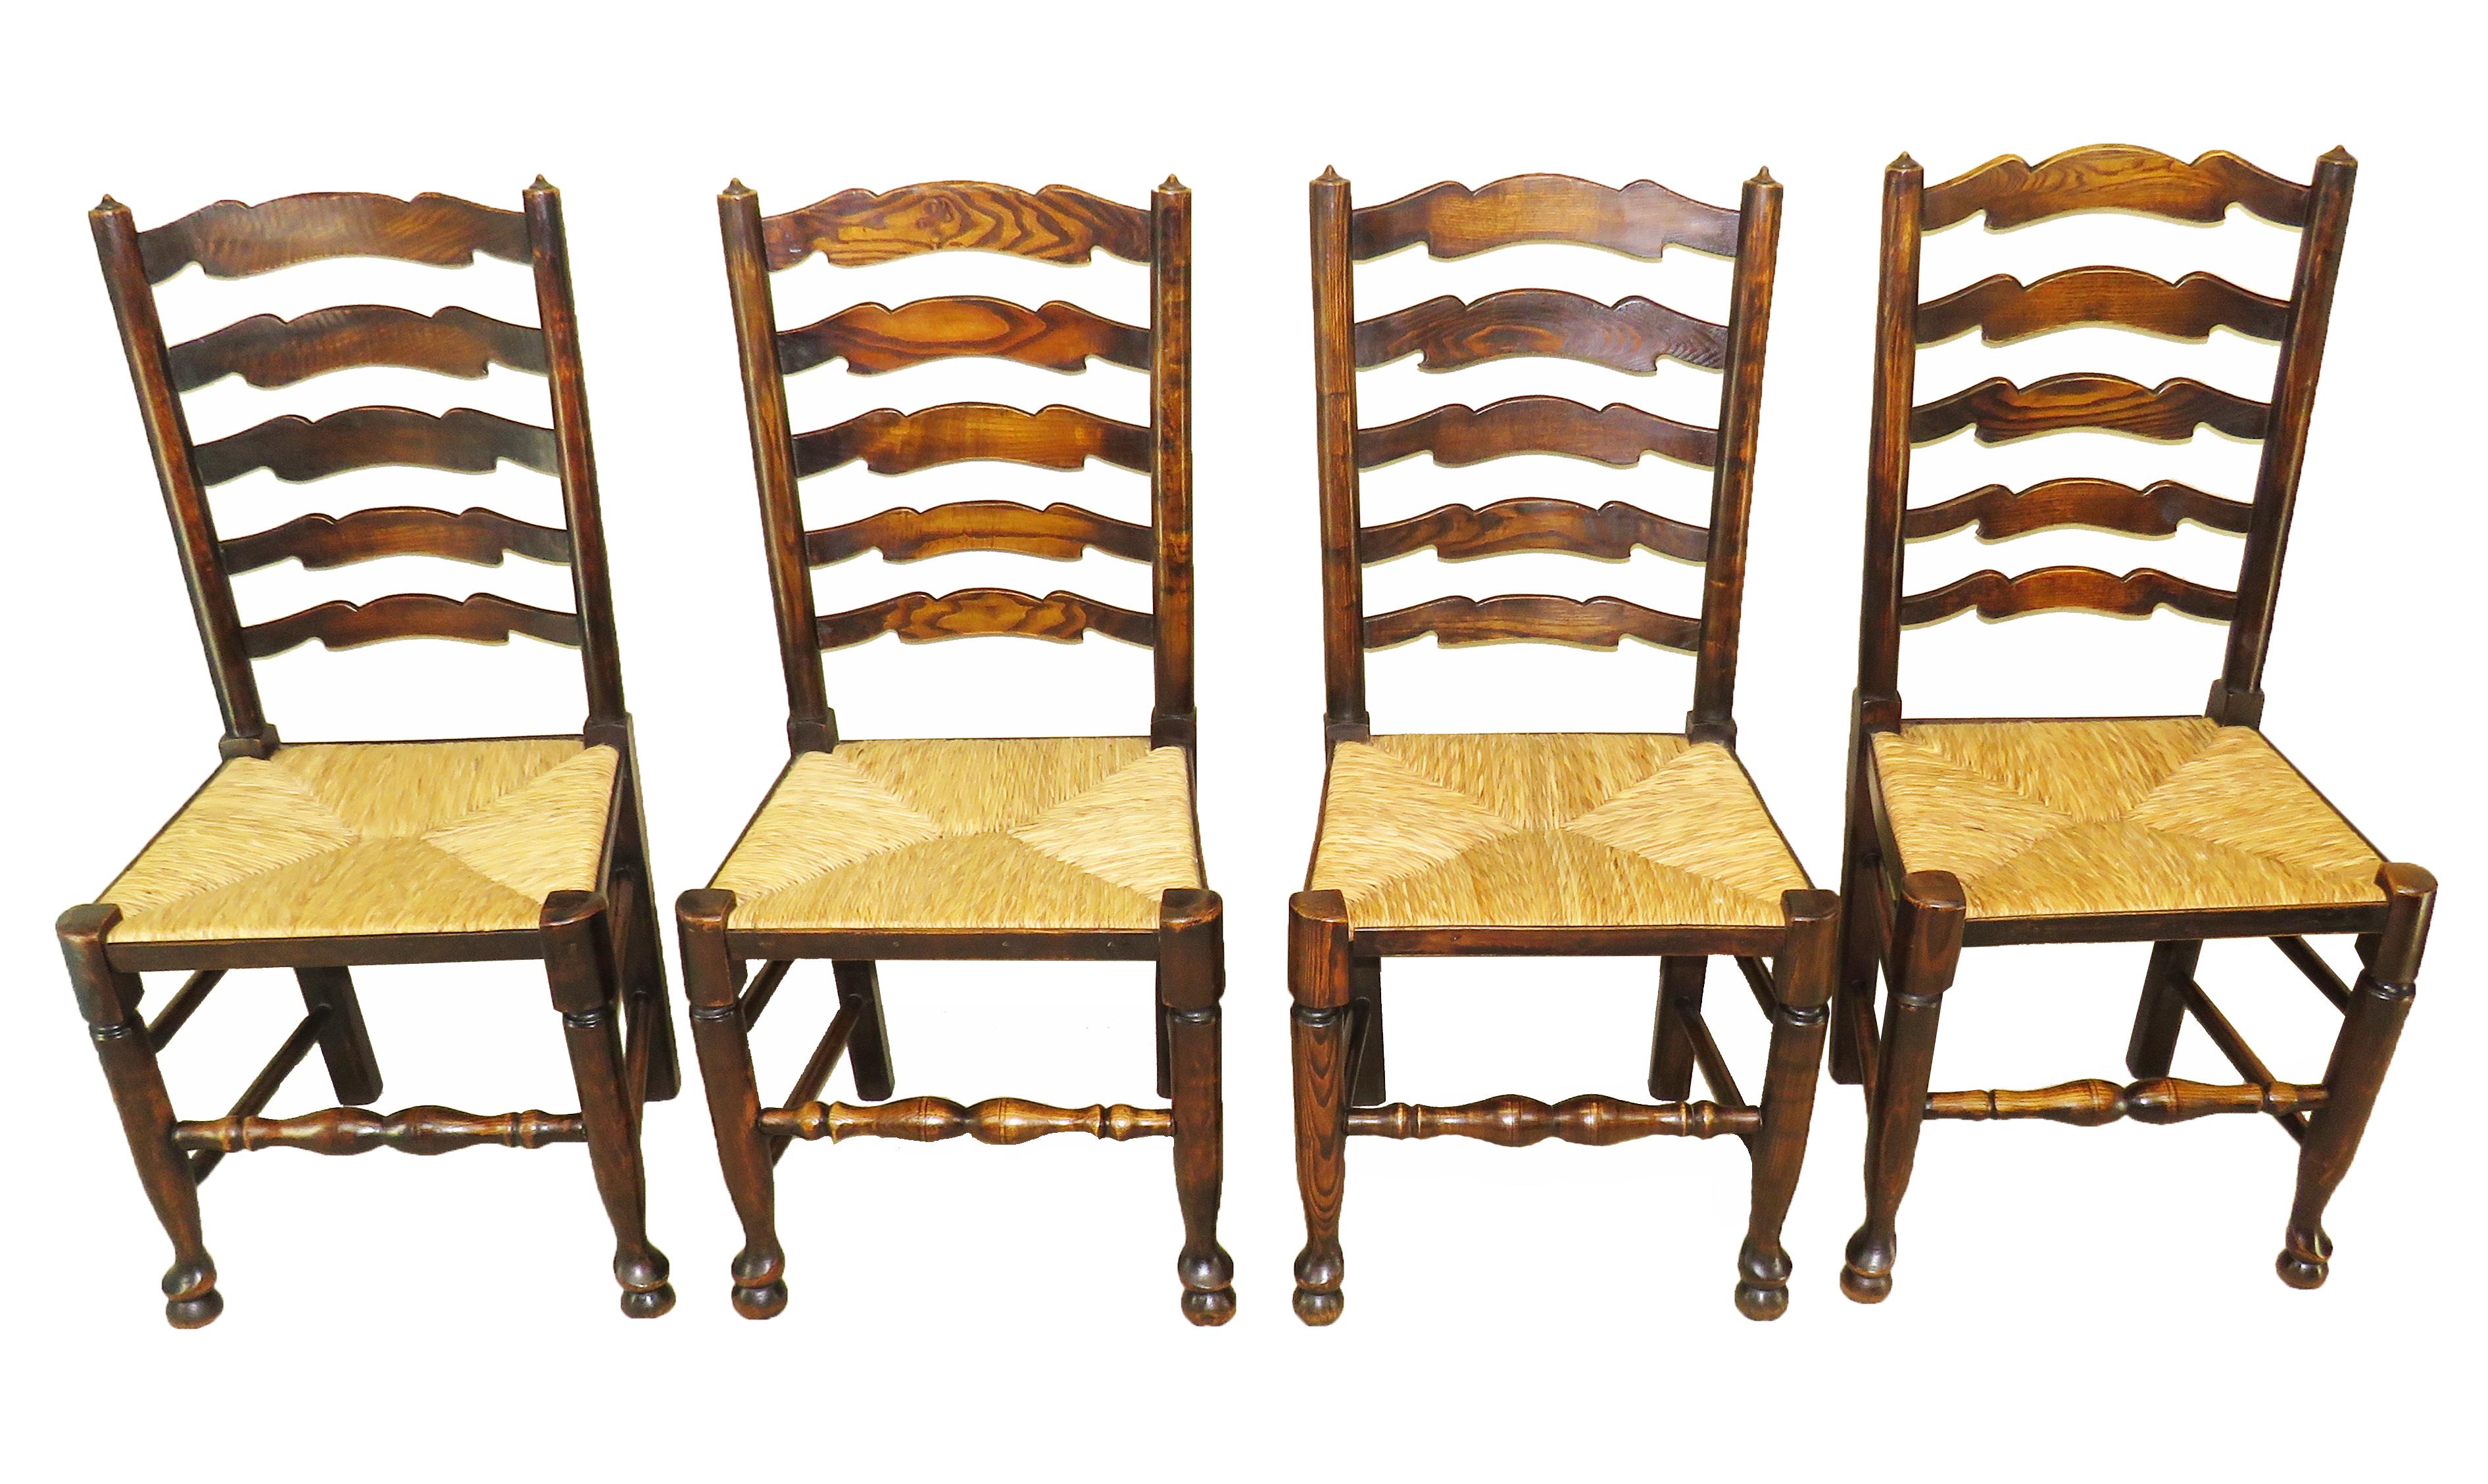 Victorian Set of 10 English 19th Century Ladder Back Dining Chairs